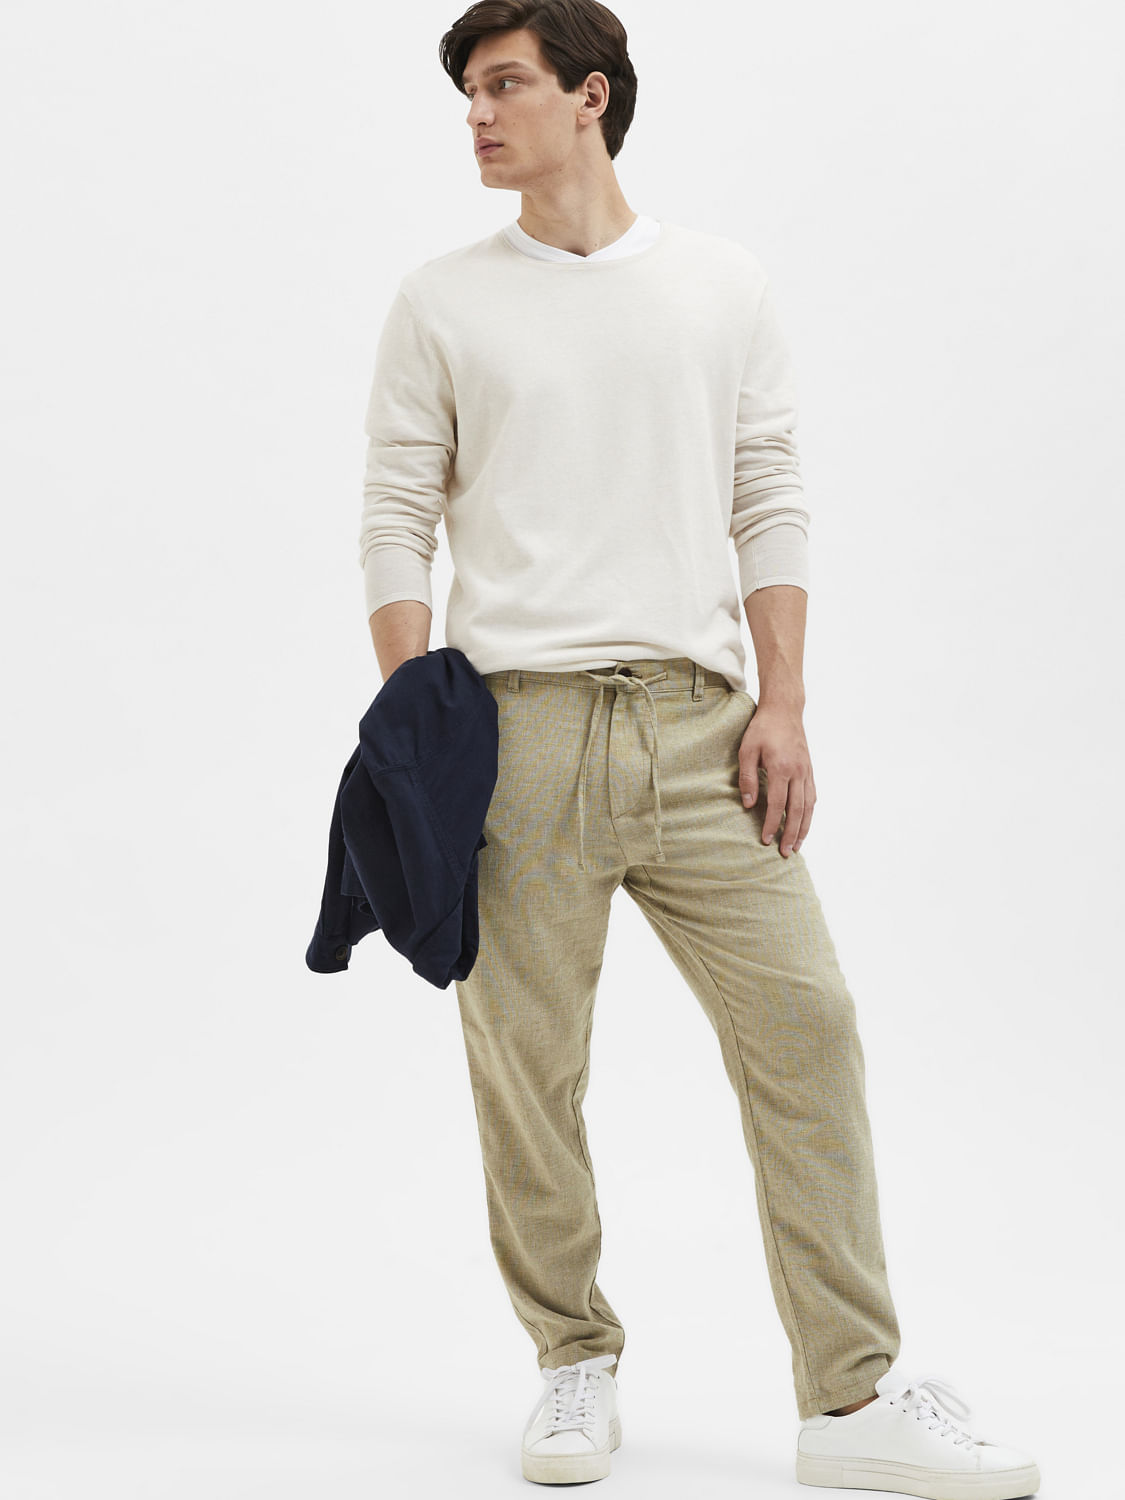 Green Pants for Men: Stylish Outfits and Recommended Items for a  Sophisticated Look | Men's Fashion Media OTOKOMAE